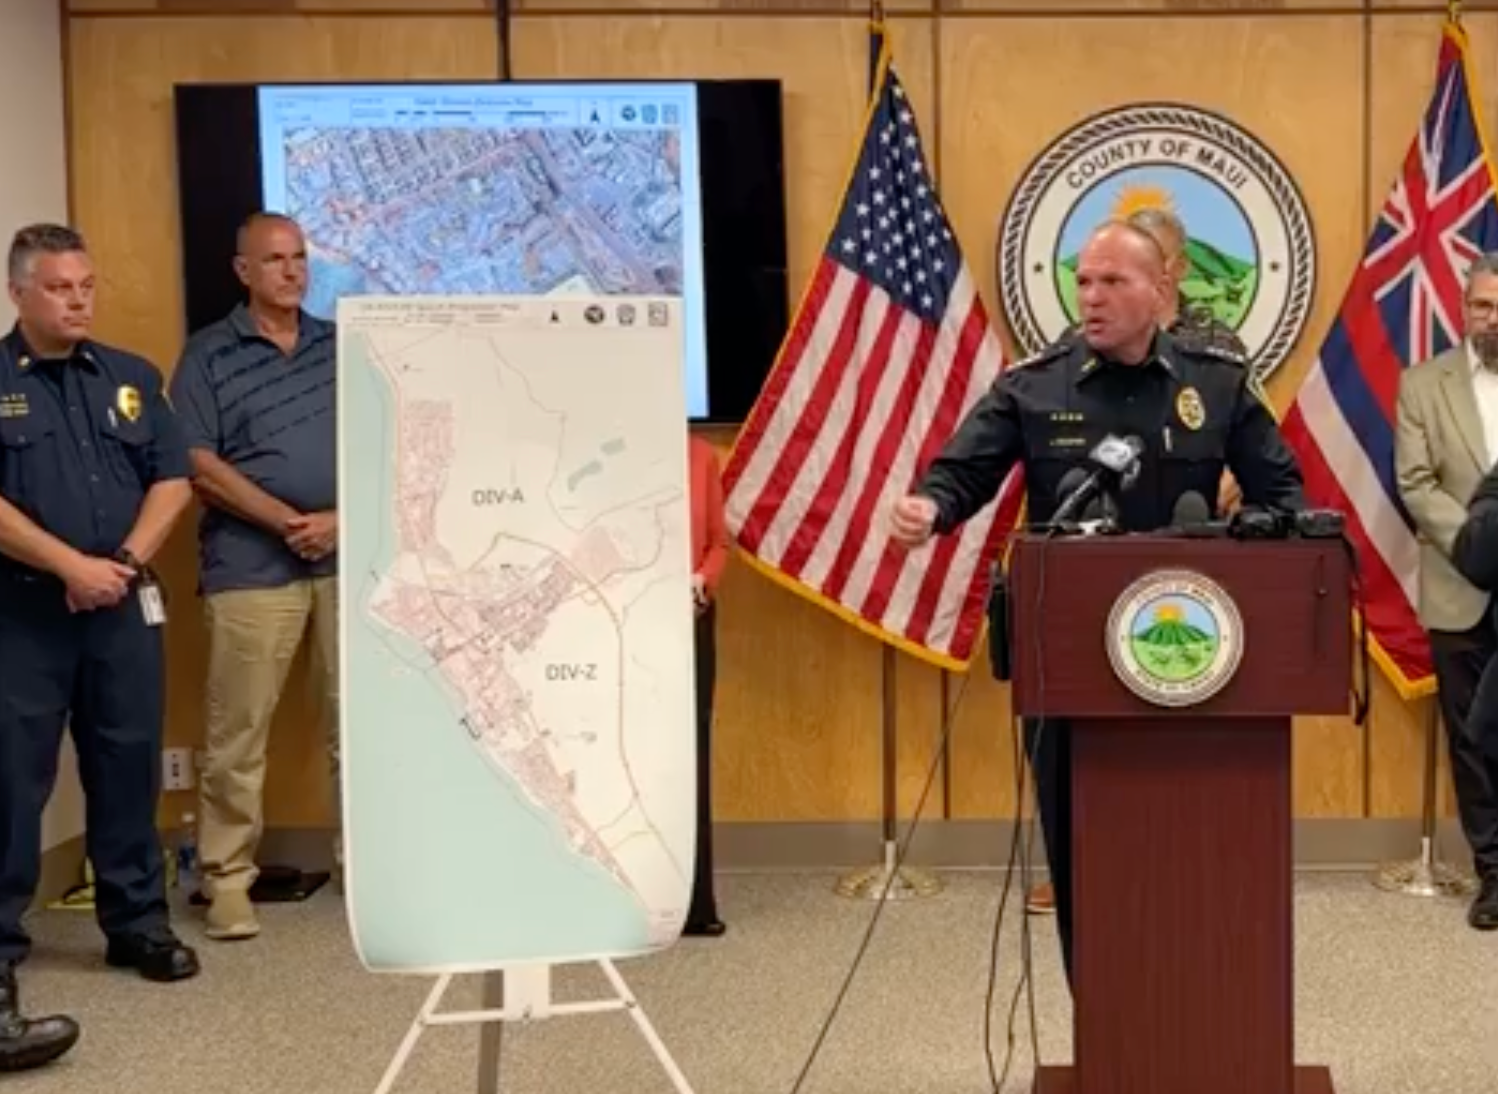 Maui police chief John Pelletier shares the breakdown of searches in Lahaina in a news conference on 23 August